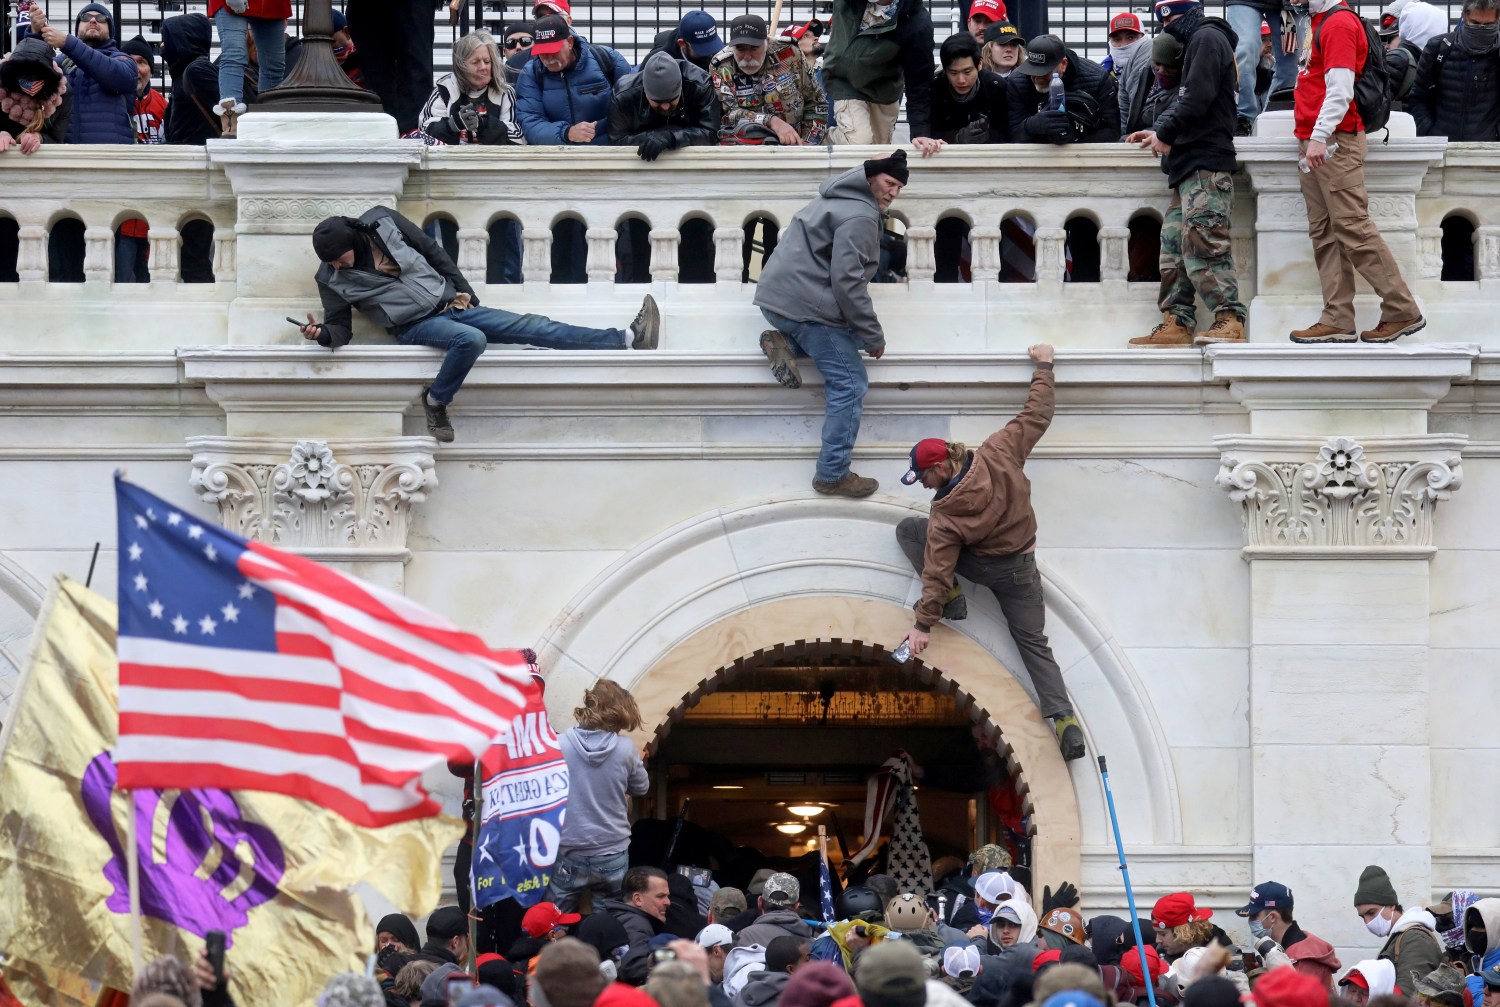 FILE PHOTO: A mob of supporters of U.S. President Donald Trump fight with members of law enforcement at a door they broke open as they storm the U.S. Capitol Building in Washington, U.S., January 6, 2021. REUTERS/Leah Millis/File Photo